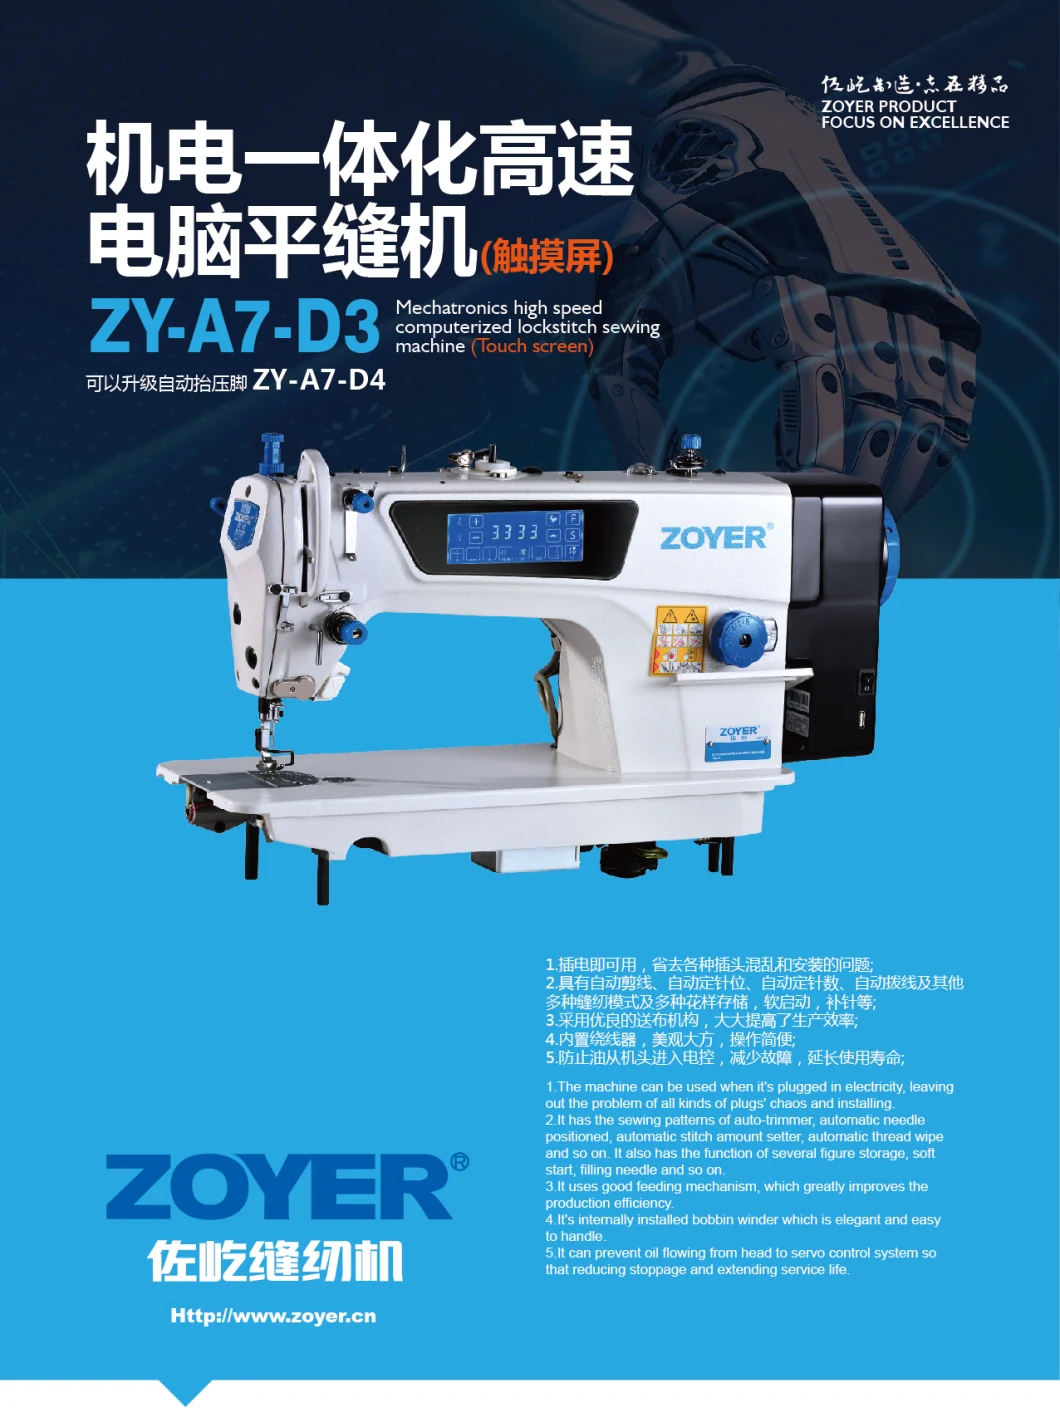 Zy-A6-D3 Zoyer Speaking Direct Drive Auto Trimmer High Speed Similar Jack Sewing Machine